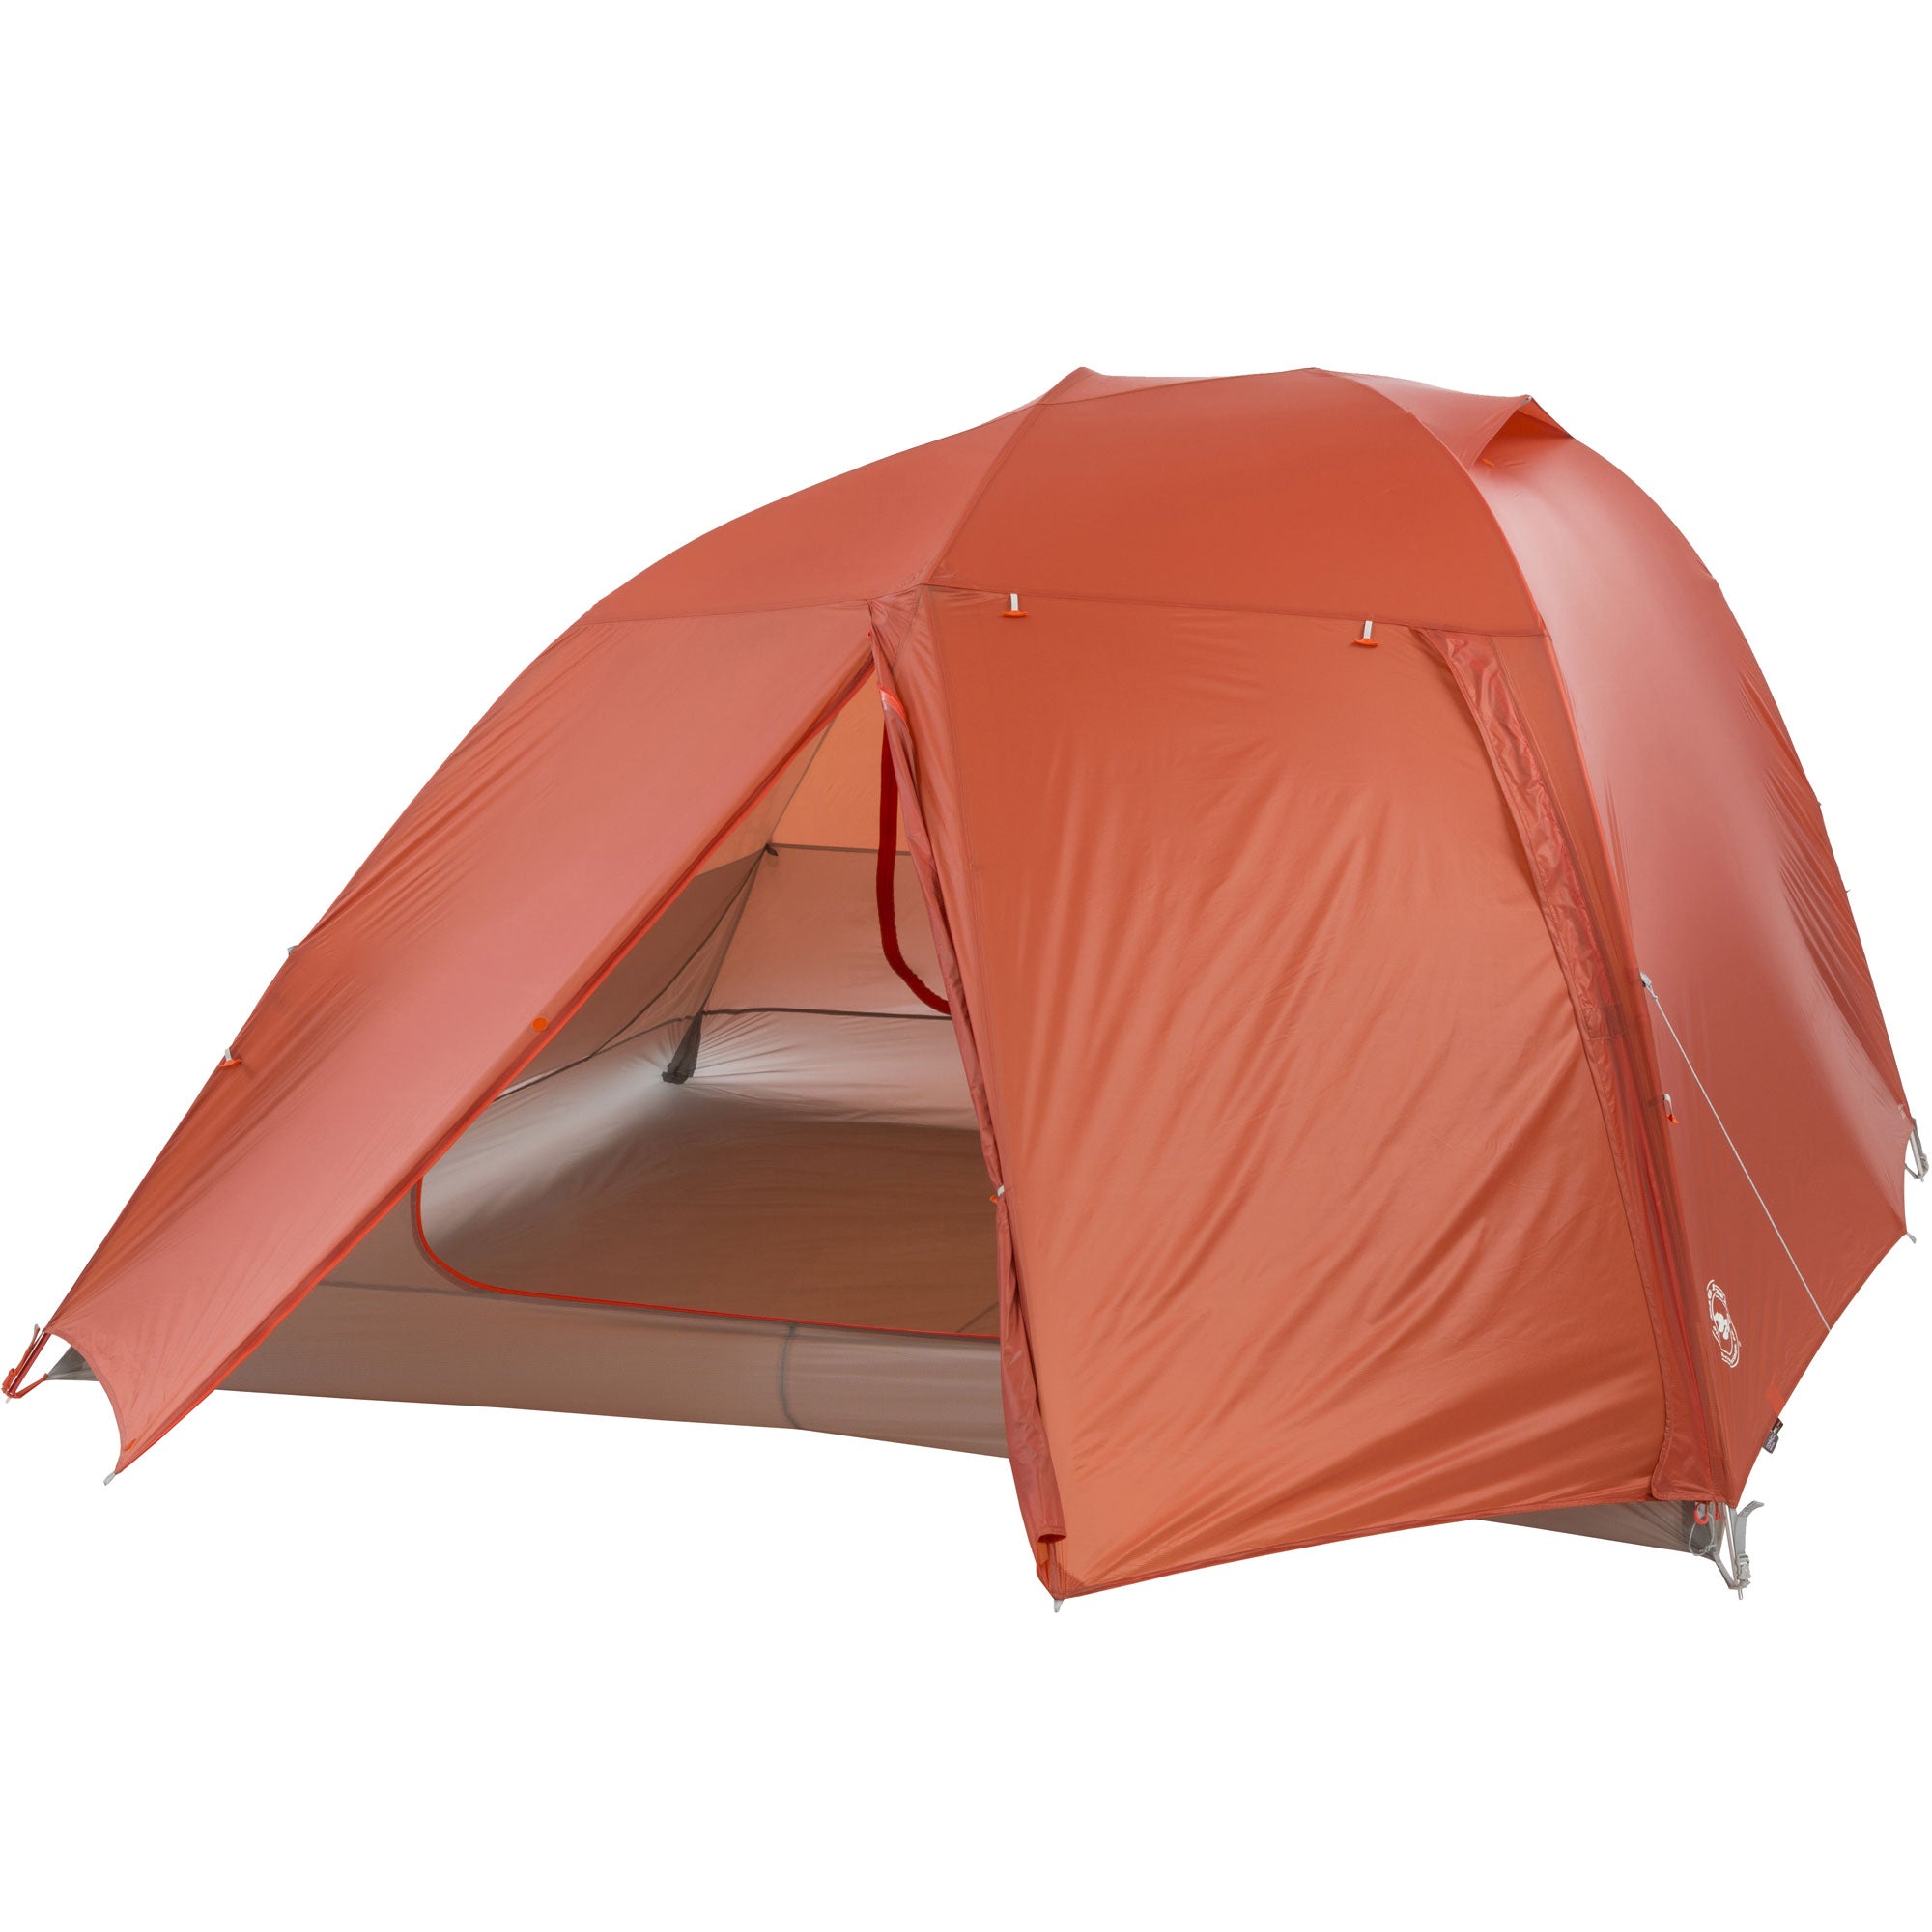 Big Agnes Copper Spur HV UL 4 Person Backpacking Tent